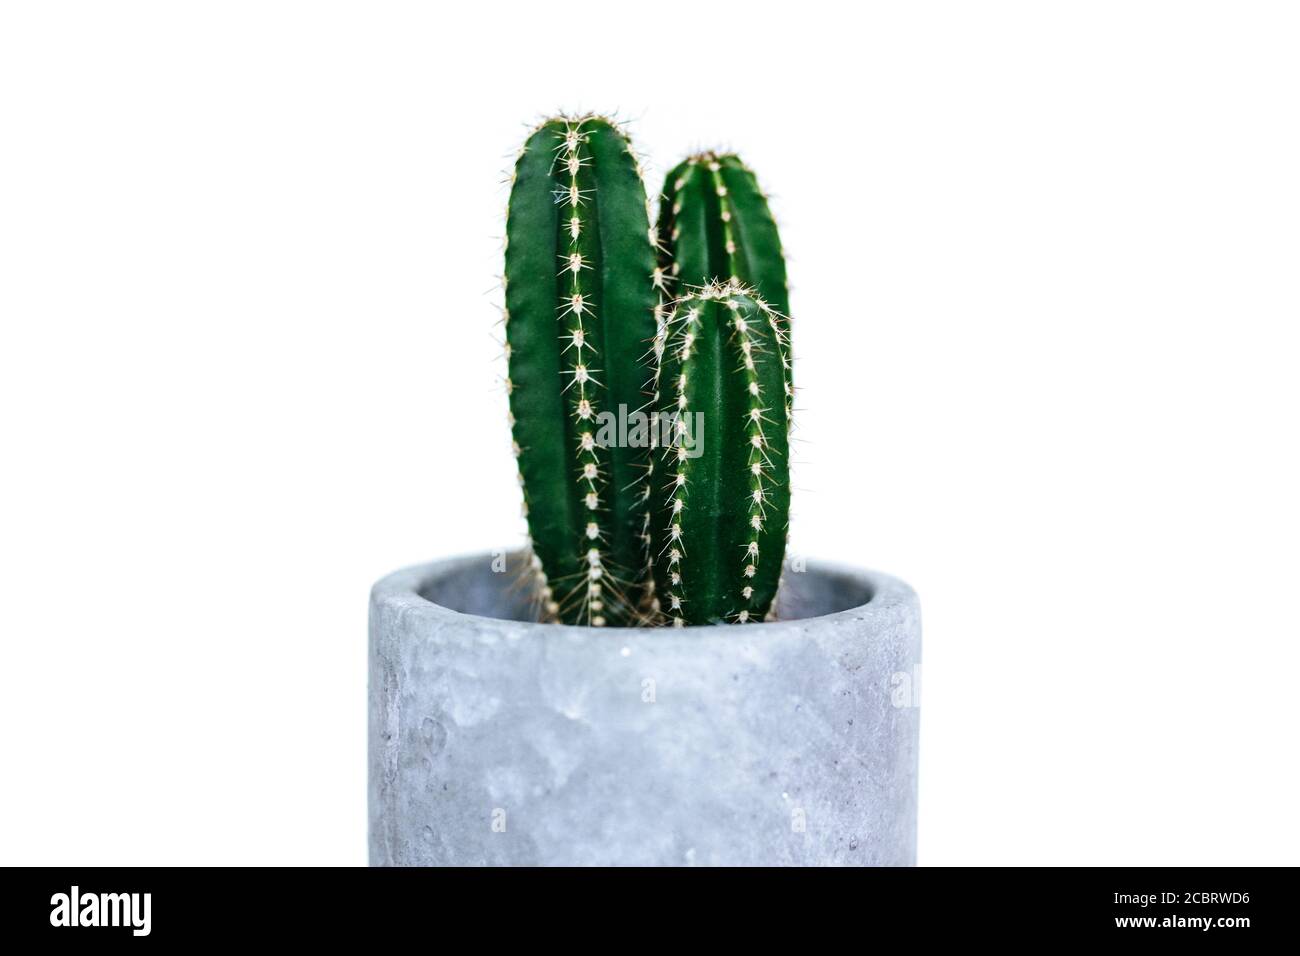 Small Tree cactus plant in a grey concrete flowerpot isolated on white background Stock Photo